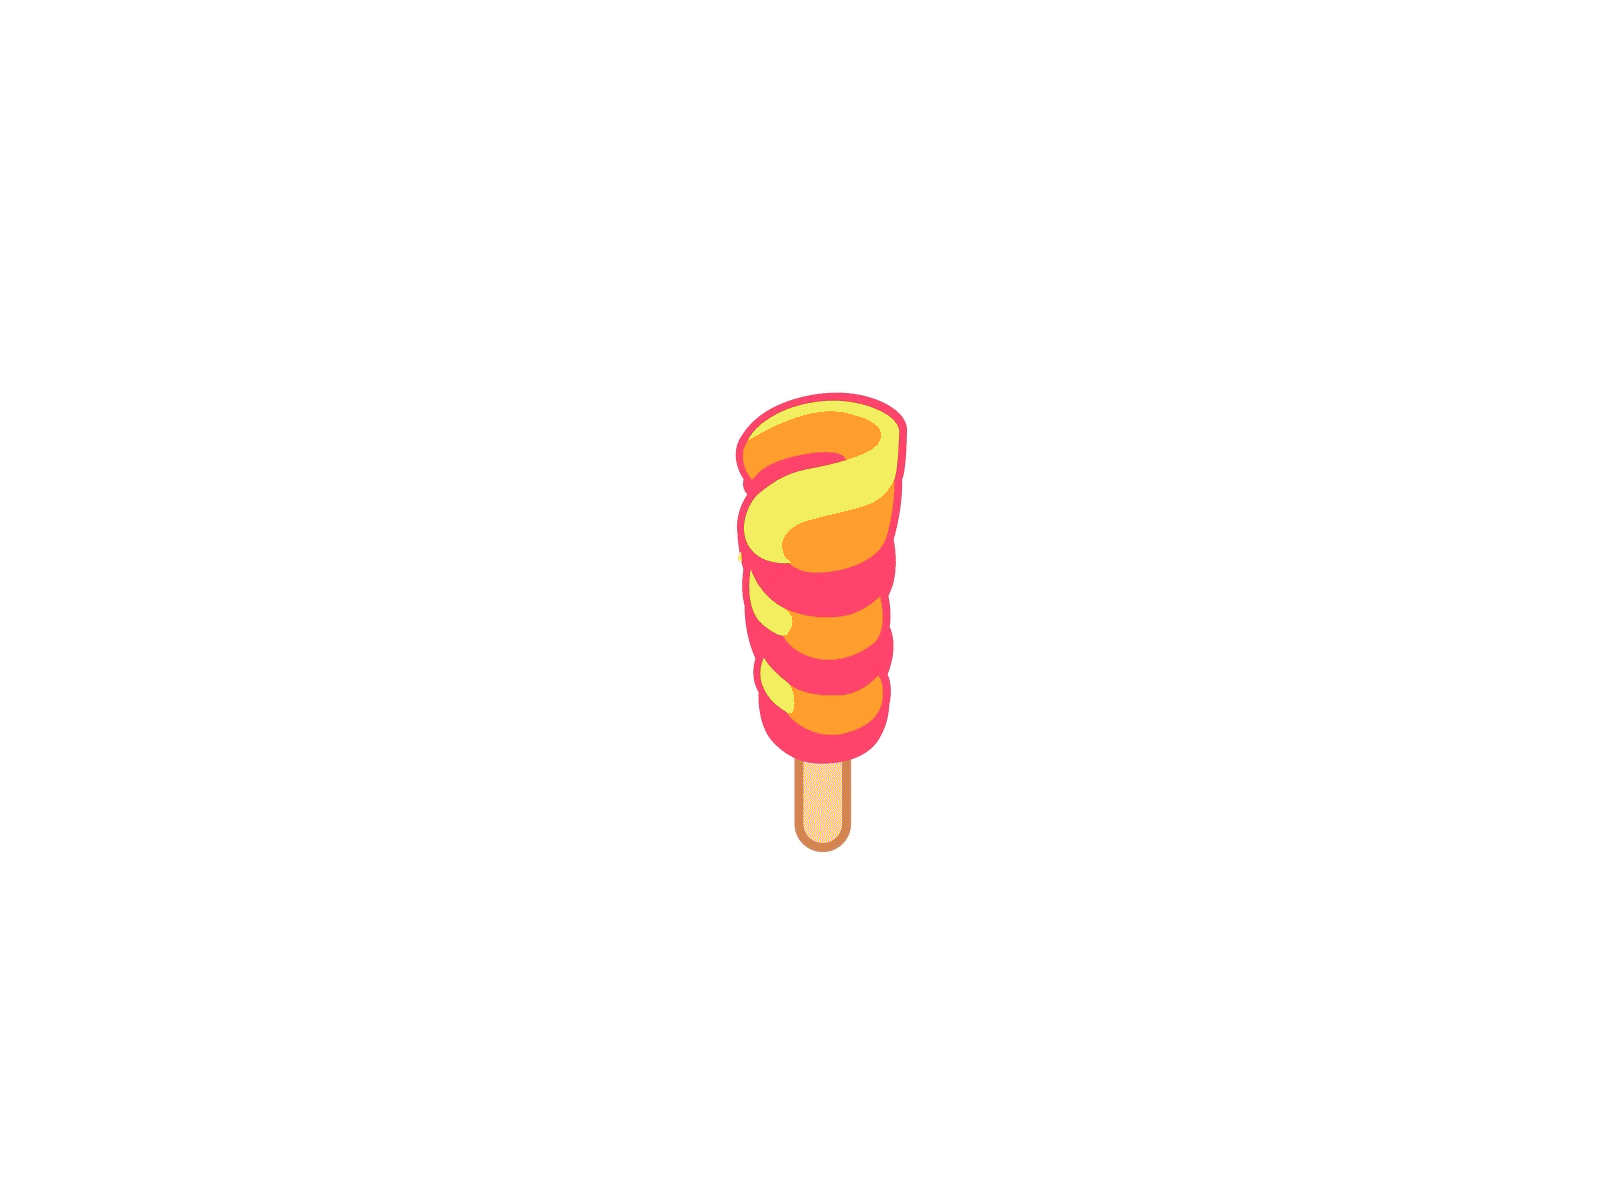 Summer Days - Twister after effects cold cool cow design gif graphics ice cream illustrator mograph motion popsicle quick summer super texture tornado tractor twister weather